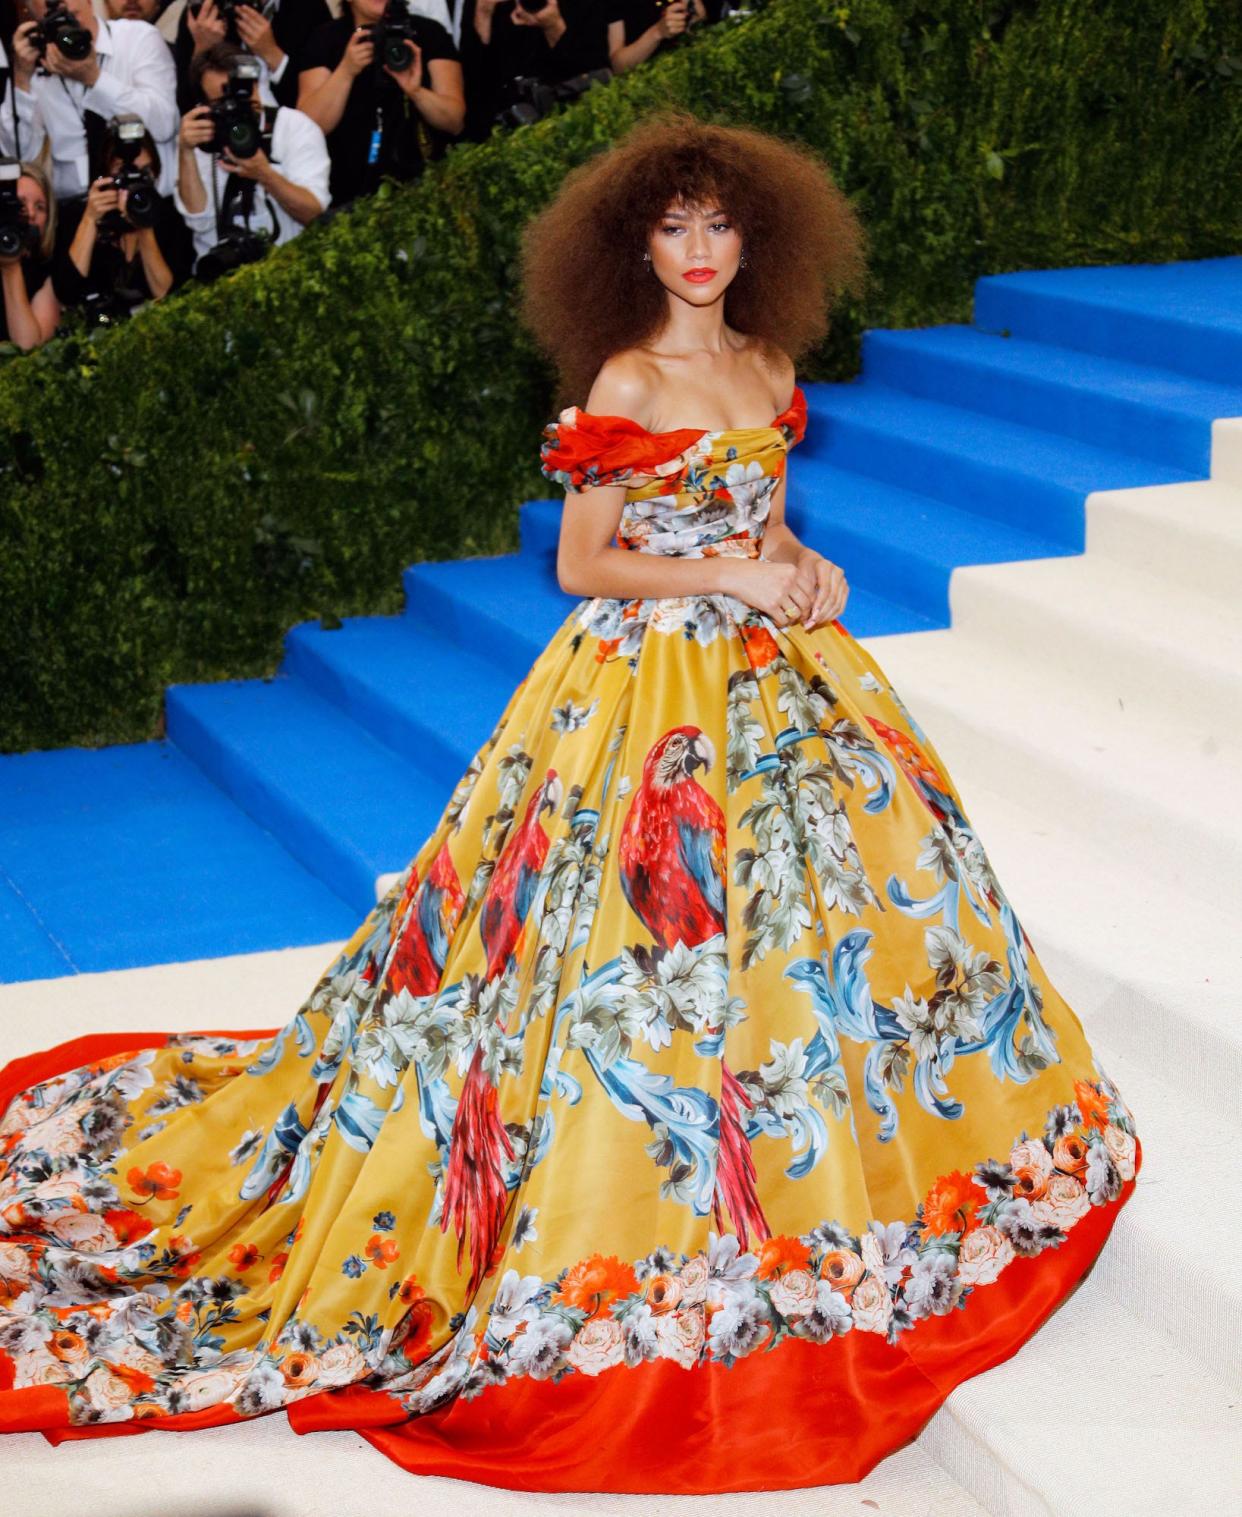 Zendaya poses on the red carpet of the 2017 Met Gala in New York City, wearing a colorful ball gown with a flower and parrot pattern.